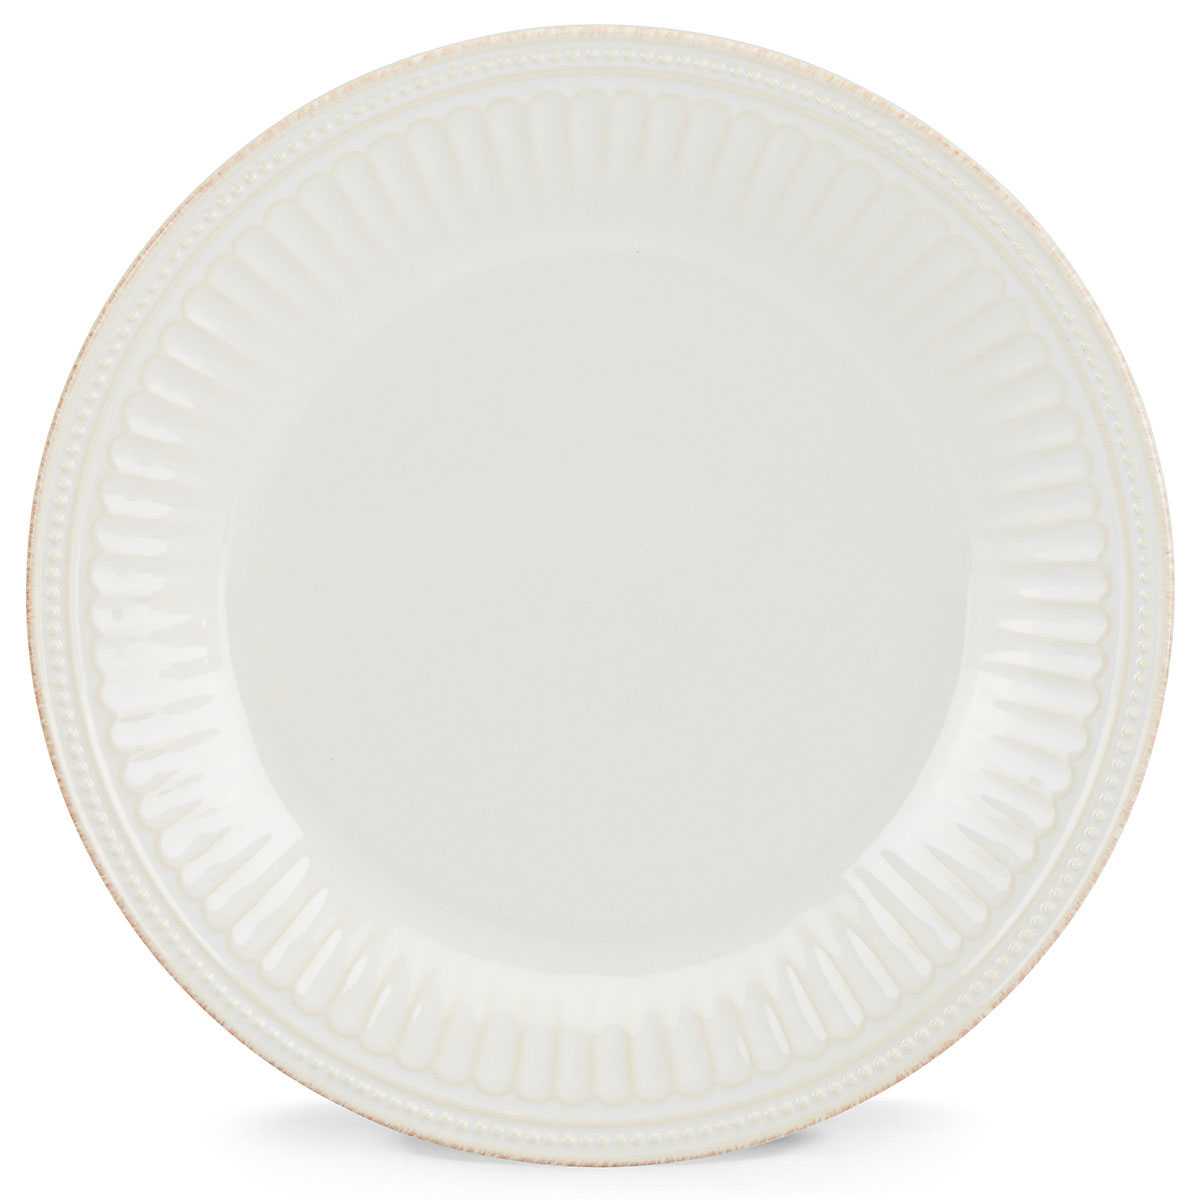 Lenox French Perle Groove White China Dinner